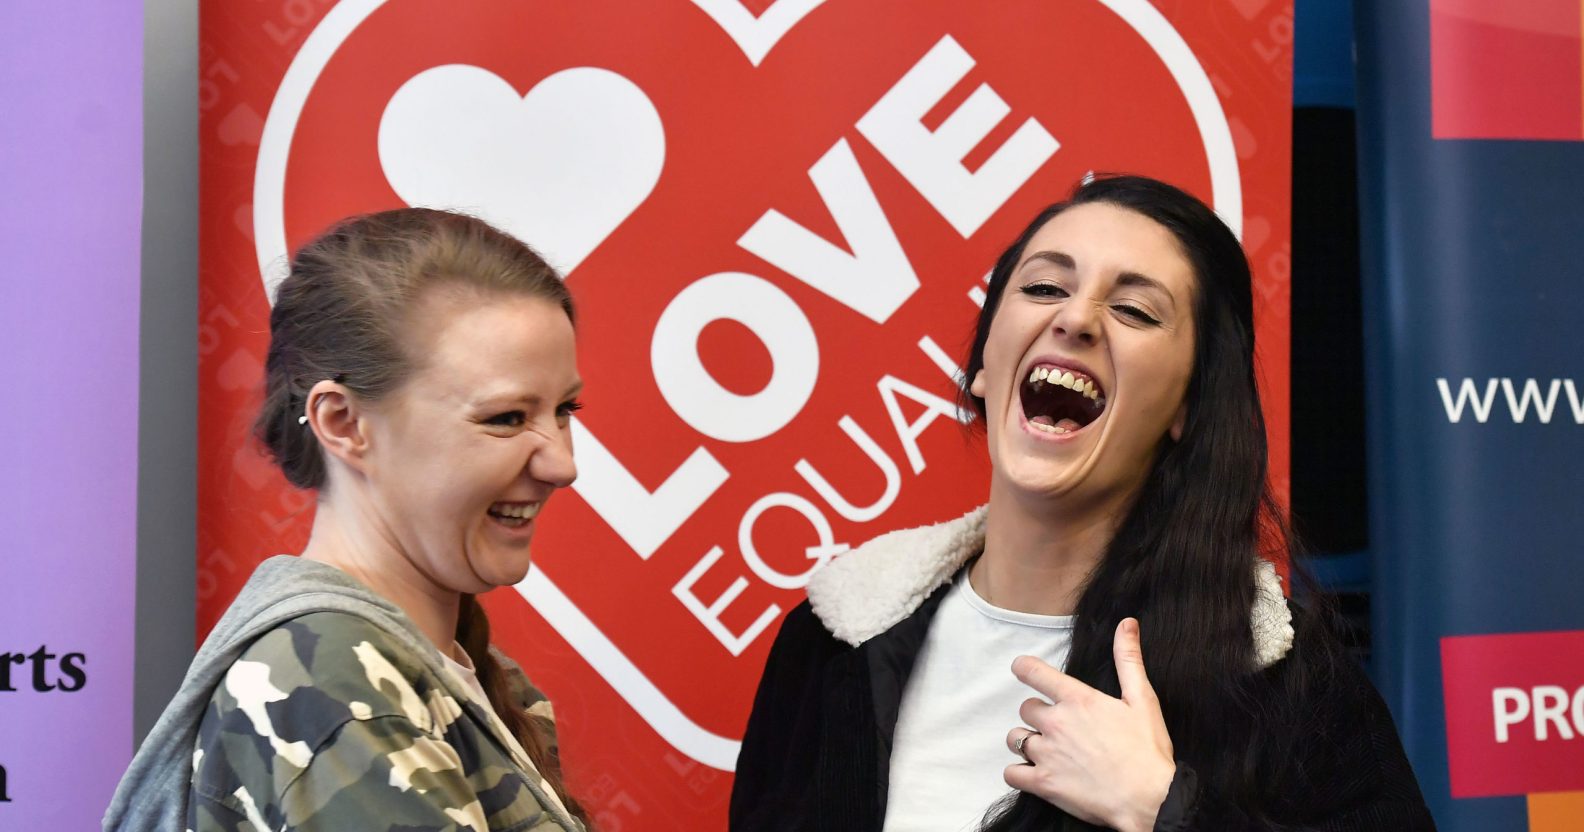 First same-sex couple to marry in Northern Ireland slams Arlene Foster